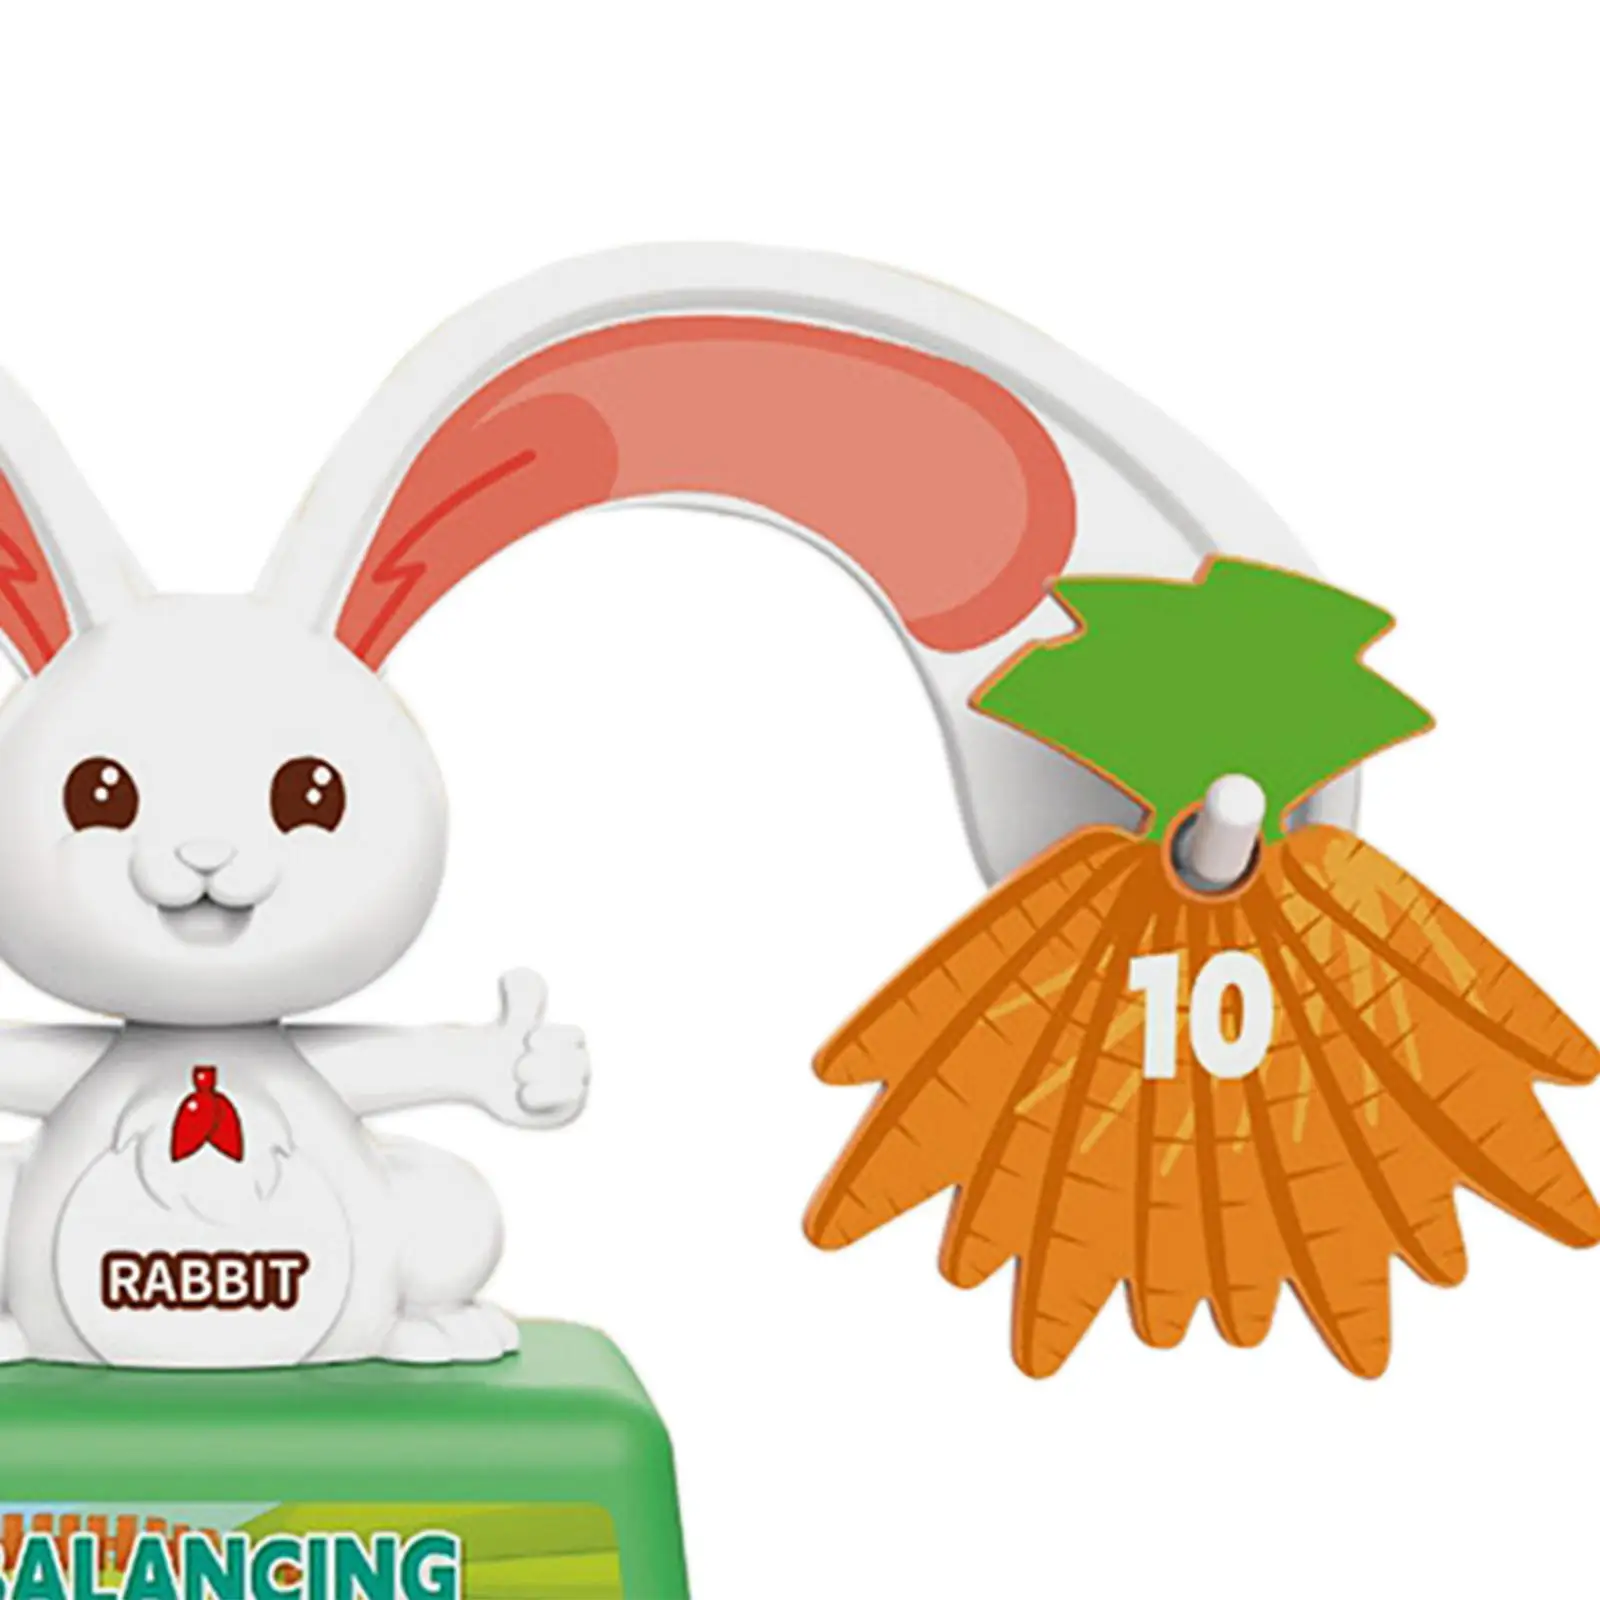 Rabbit Balance Counting Montessori Early Educational Toy Math Subtracting and Addition for Boys Girls Homeschool Kids